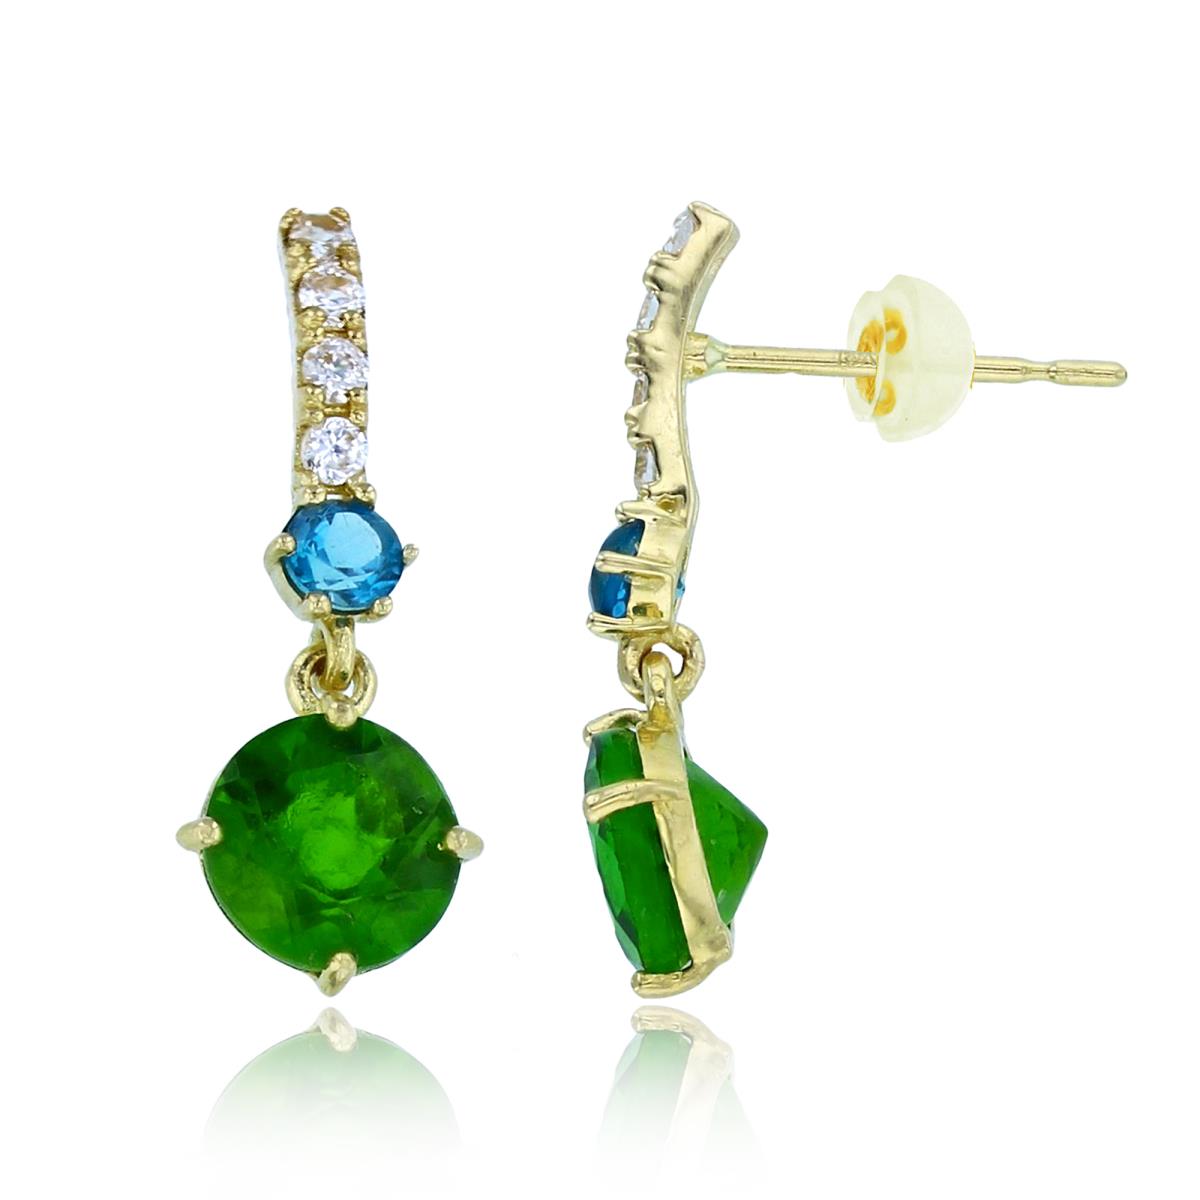 14K Yellow Gold 6mm Rnd Chrom Diopside/London Bl.Topaz & Wh.Zircon Dangling Earrings with Silicon Backs